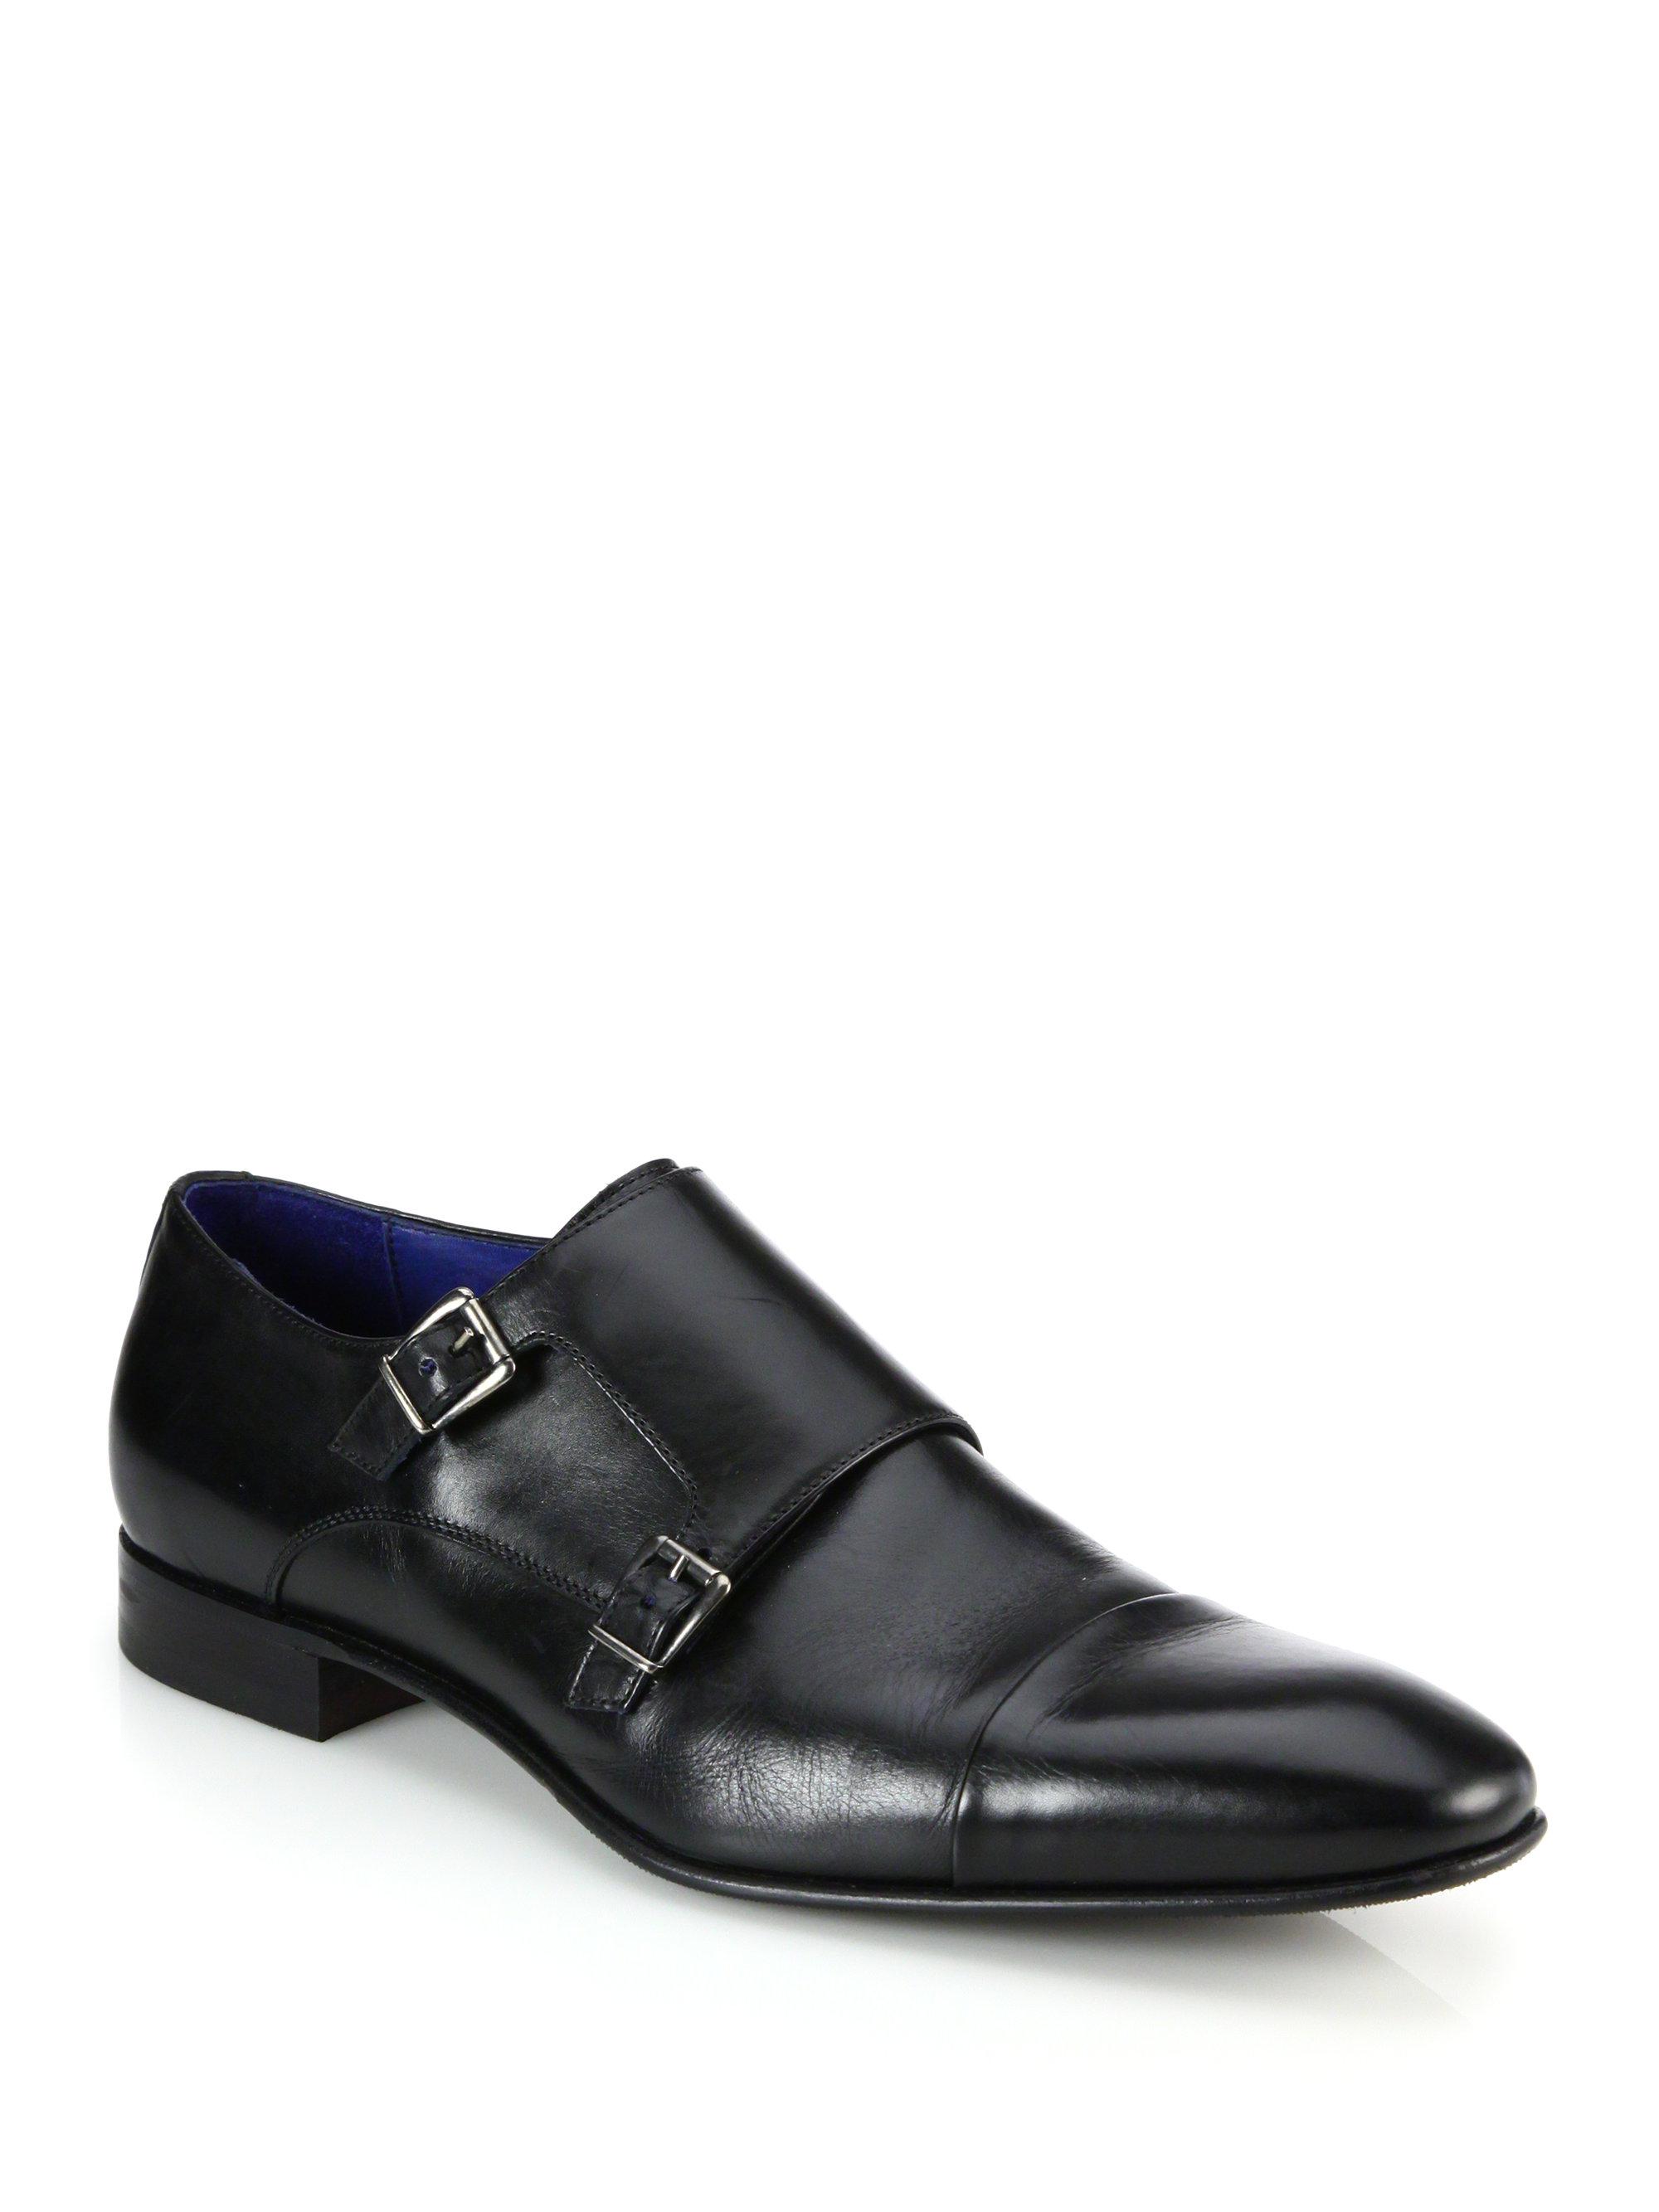 Lyst - Saks Fifth Avenue Double Monk-strap Leather Shoes in Black for Men